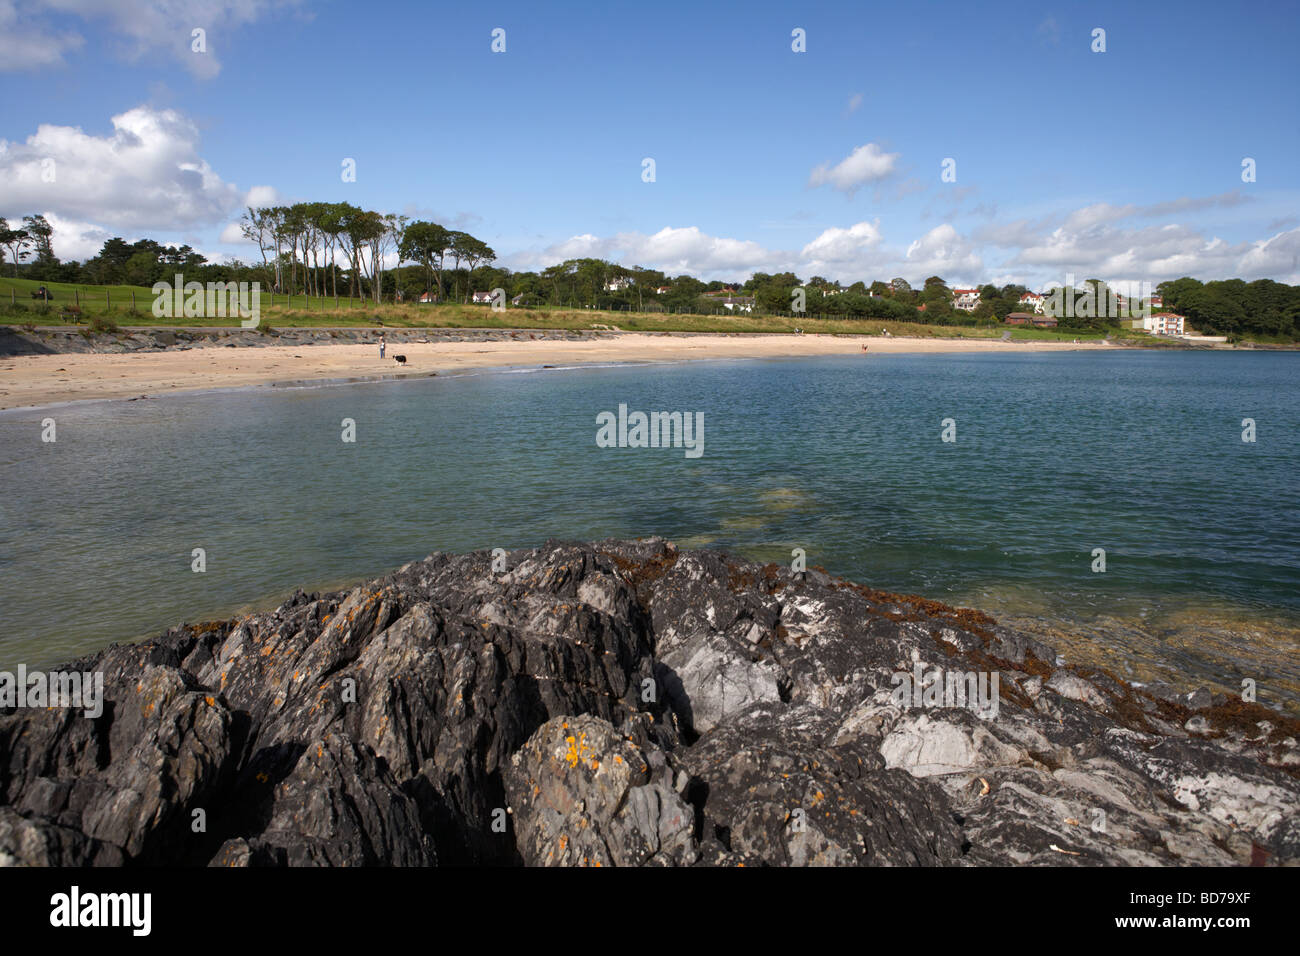 Helens bay beach now part of crawfordsburn country park in north county down northern ireland uk Stock Photo